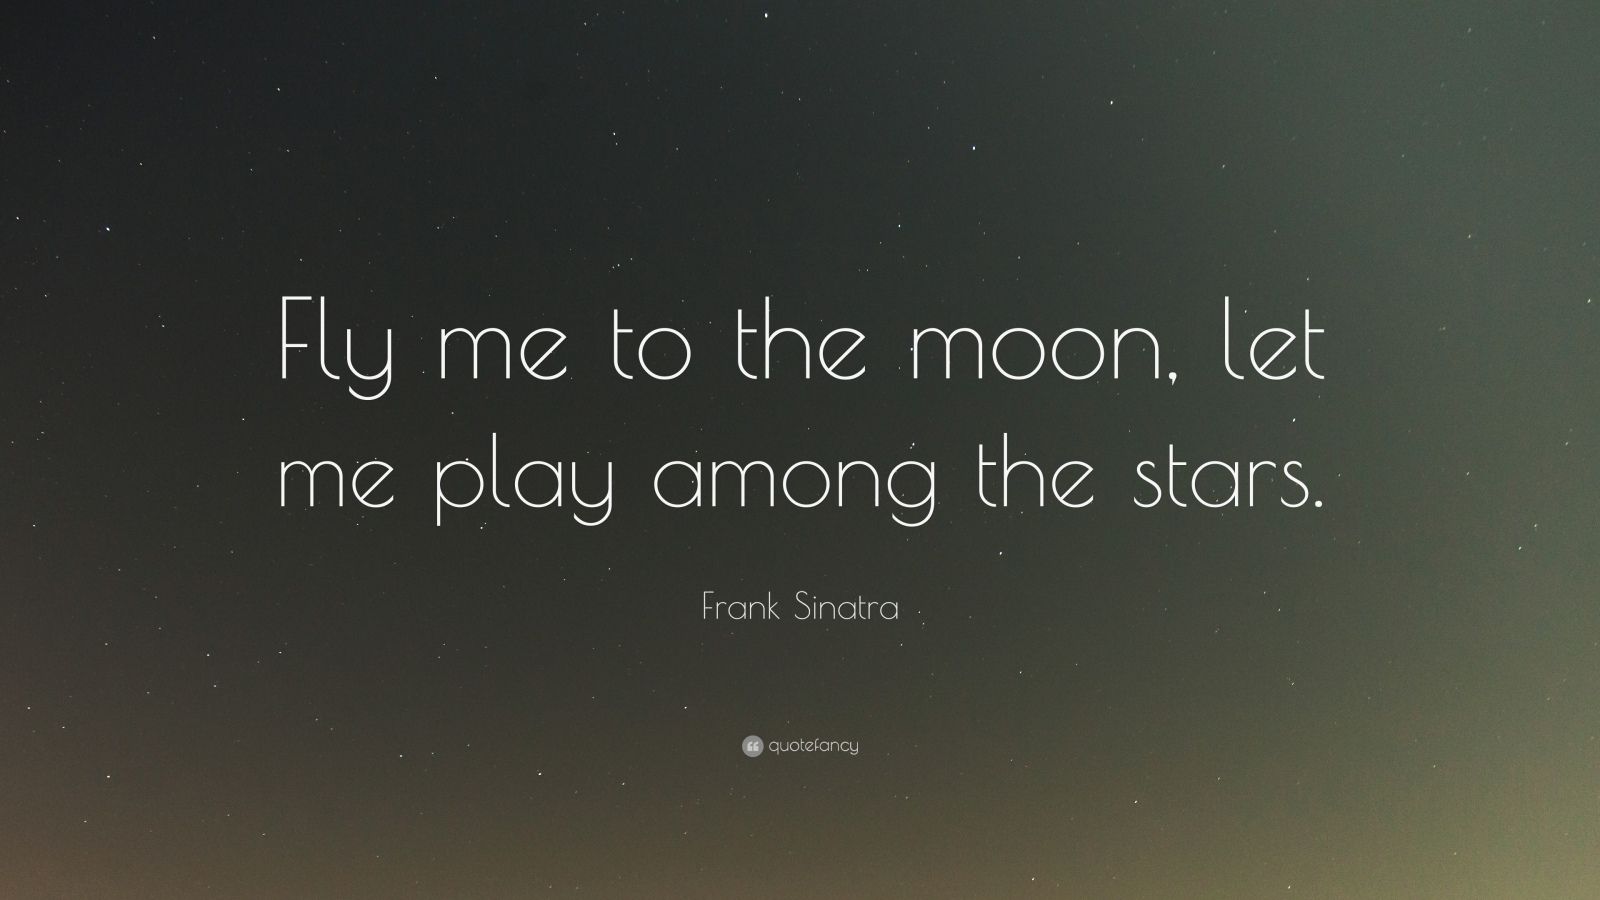 Frank Sinatra Quote: "Fly me to the moon, let me play ...